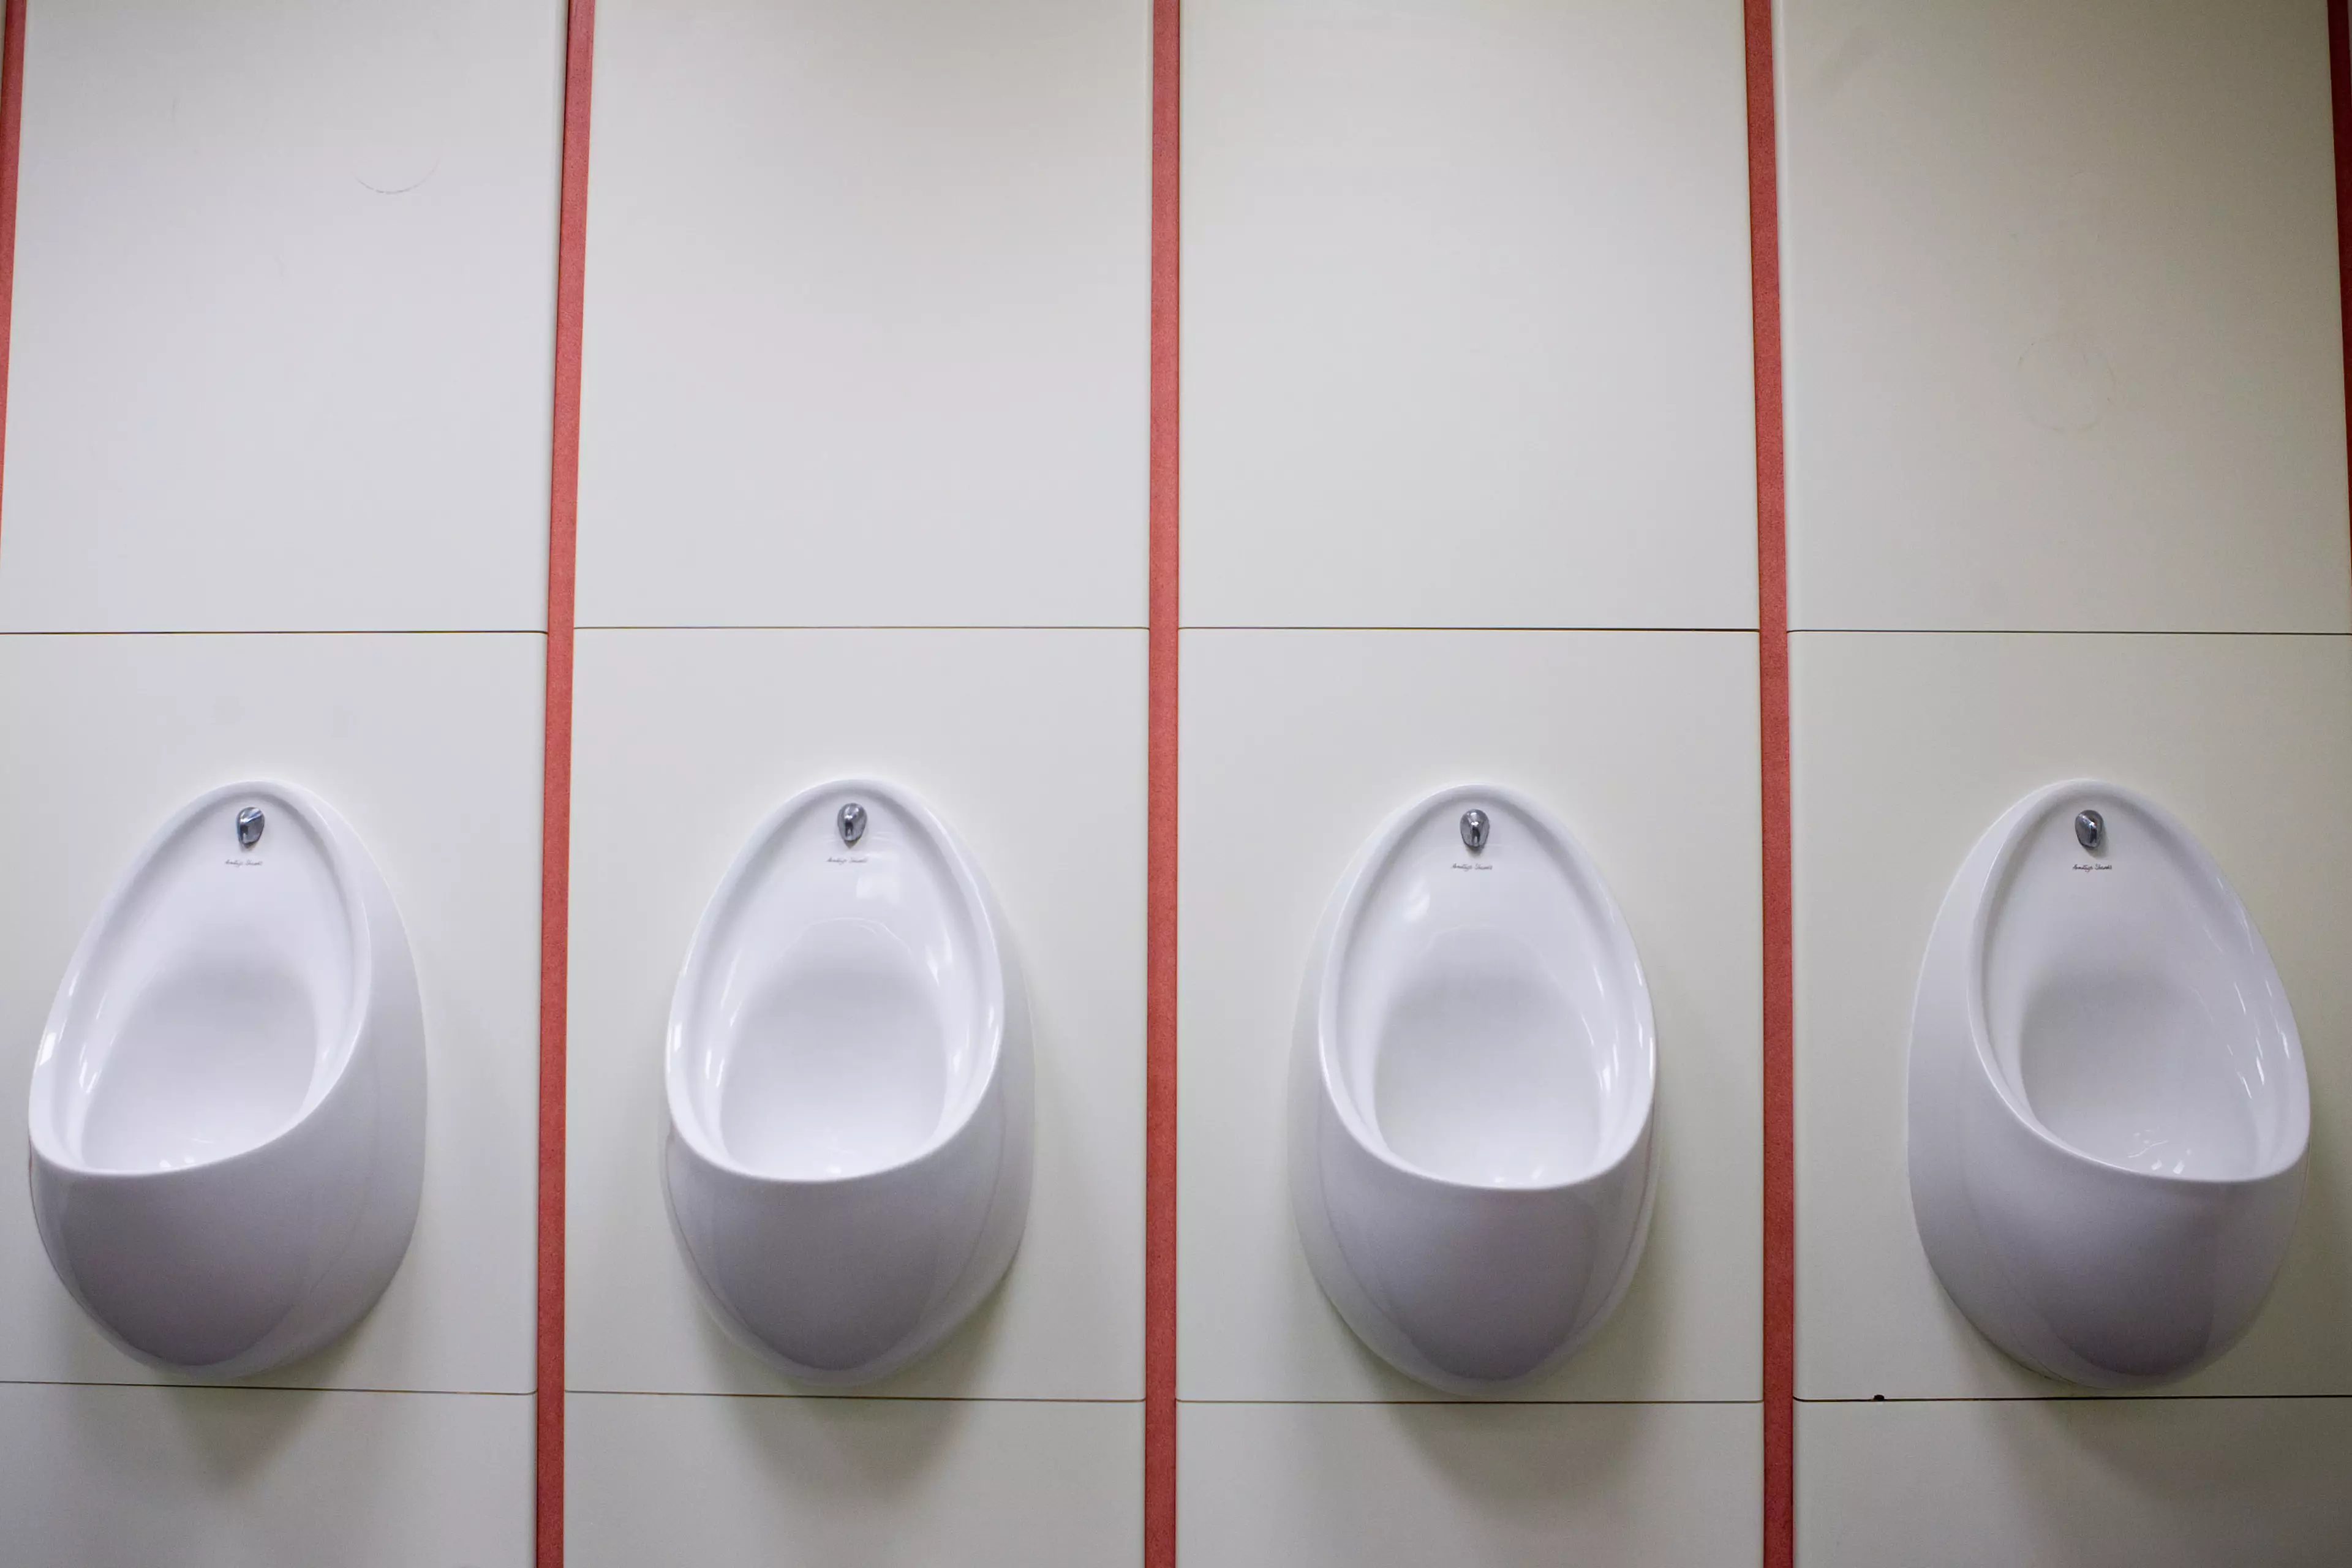 This Urinal Could Be A Game Changer As It Washes And Dries Your Dick